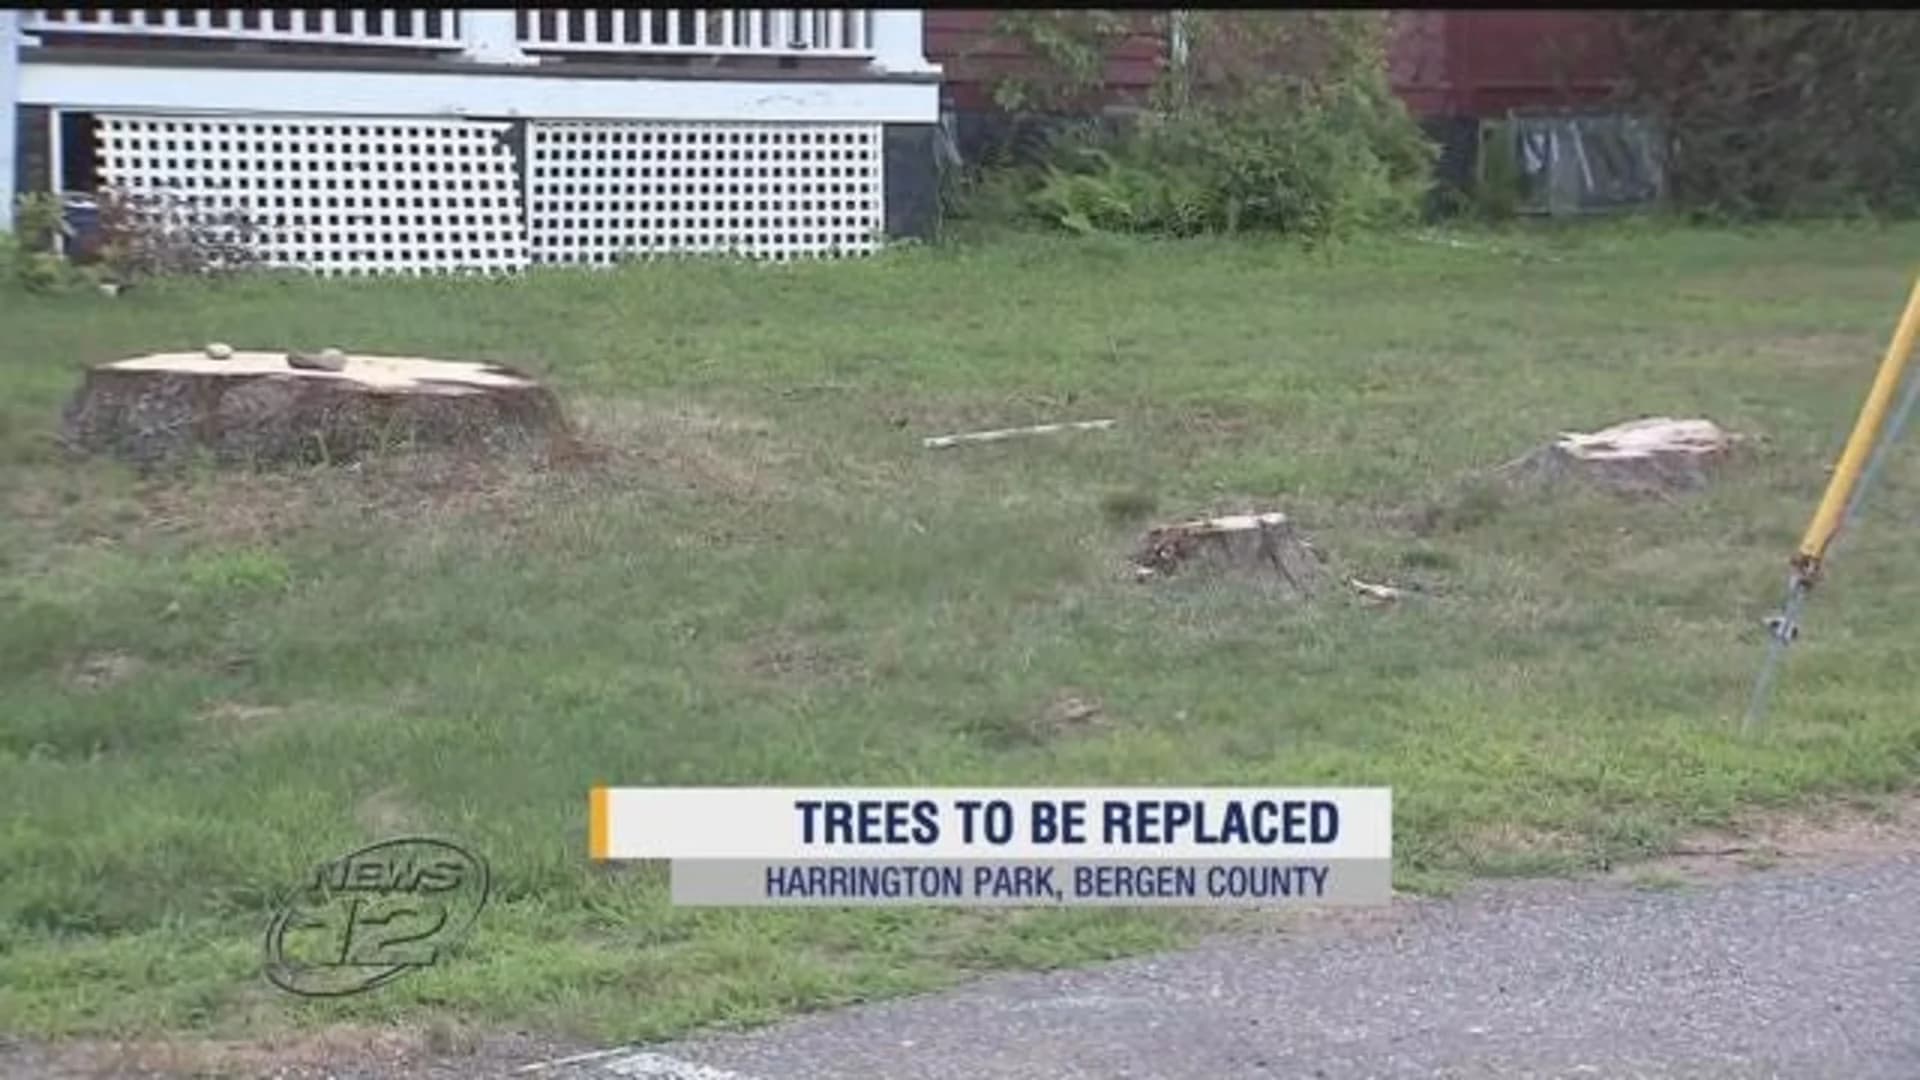 School officials to replace accidentally cut trees